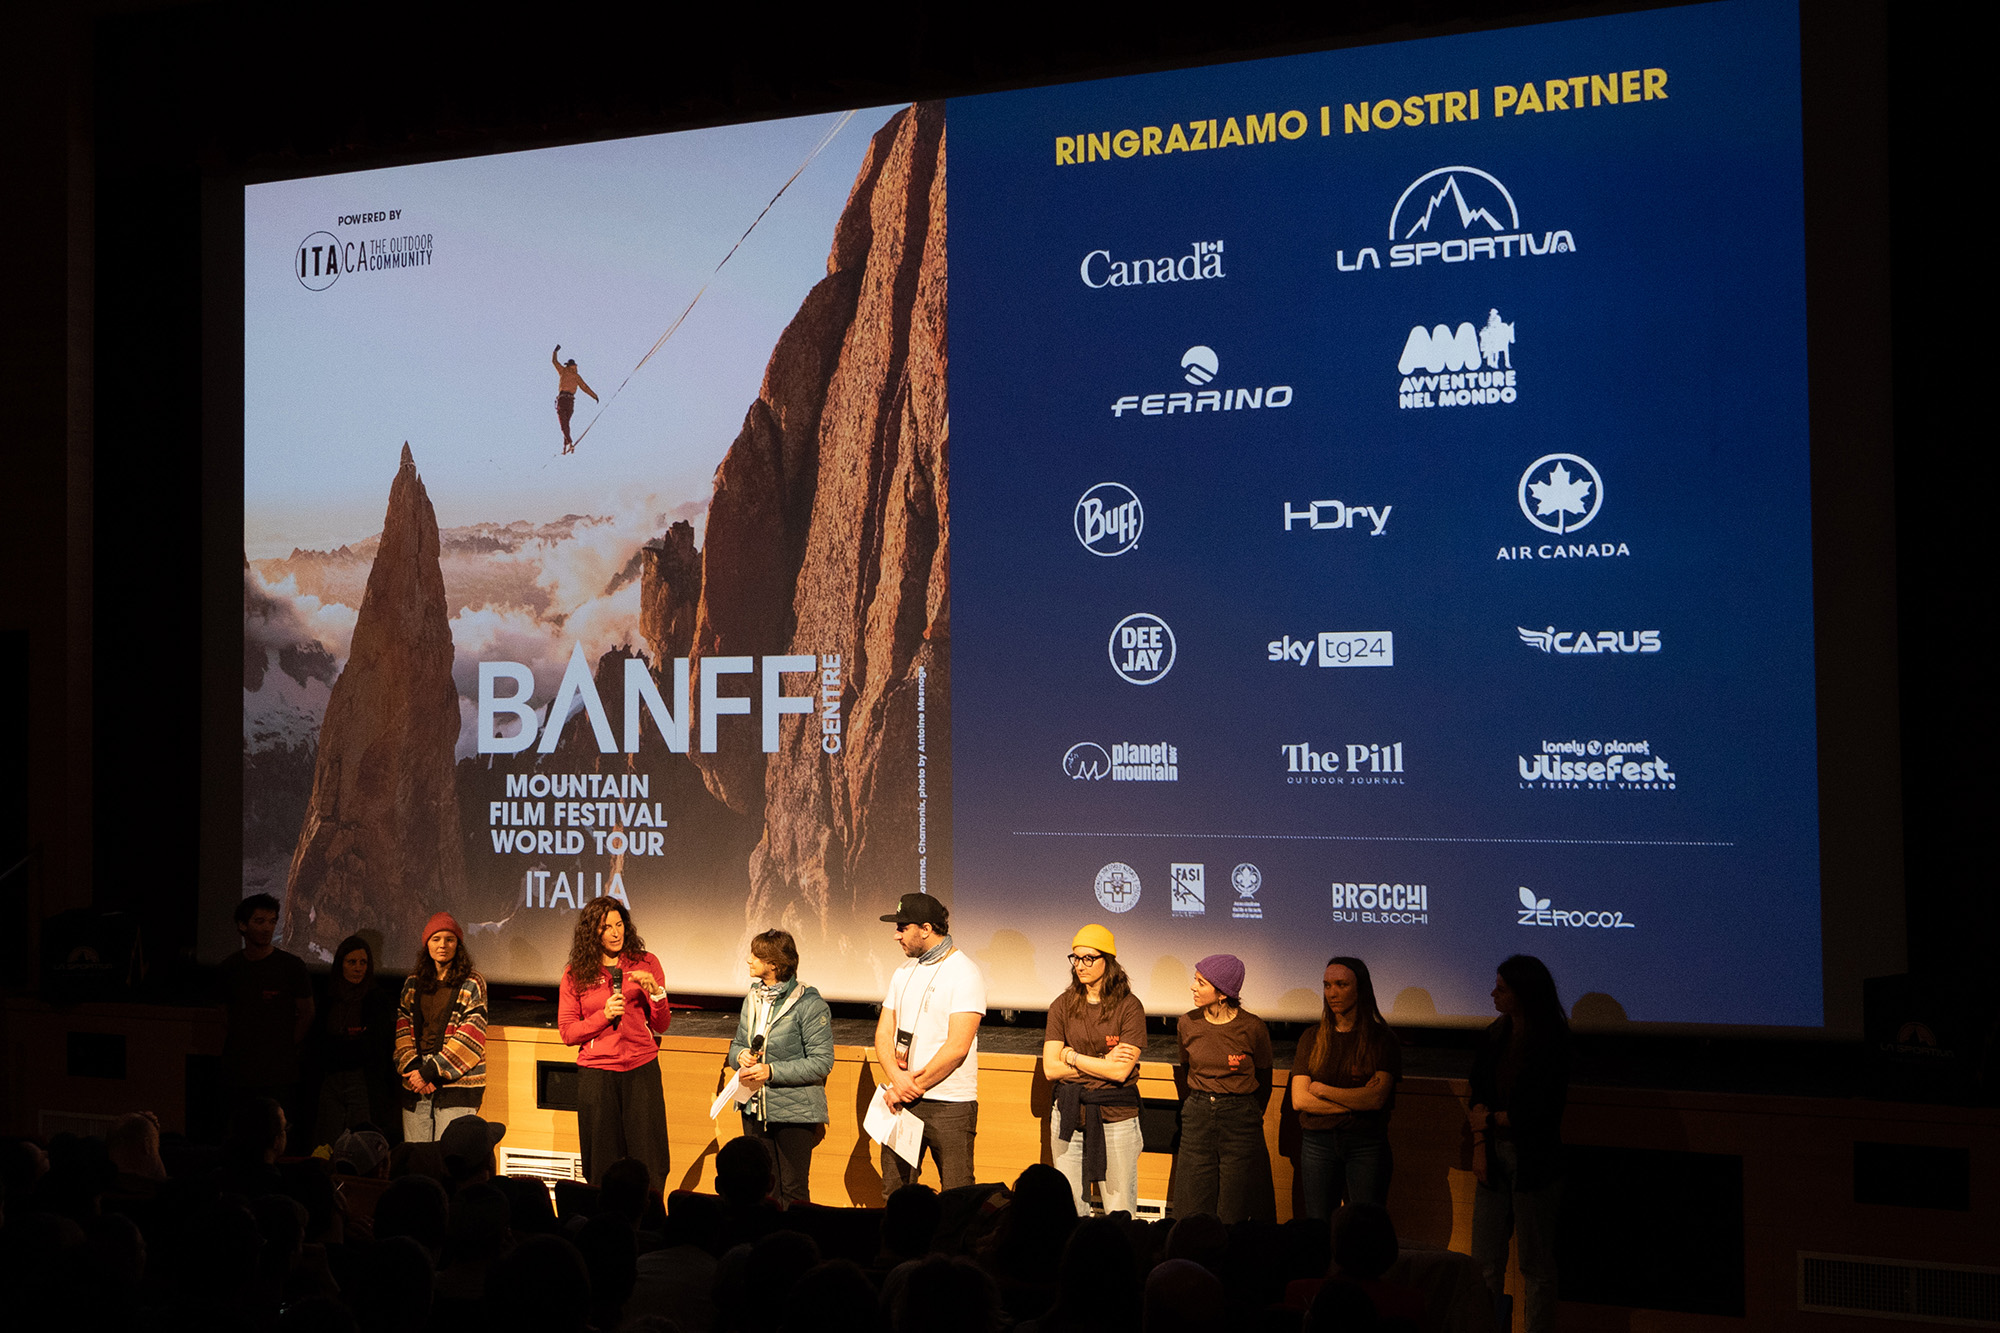 We interviewed Alessandra Raggio, curator, organizer and promoter of Banff Centre Mountain Film Festival World Tour in Italy.